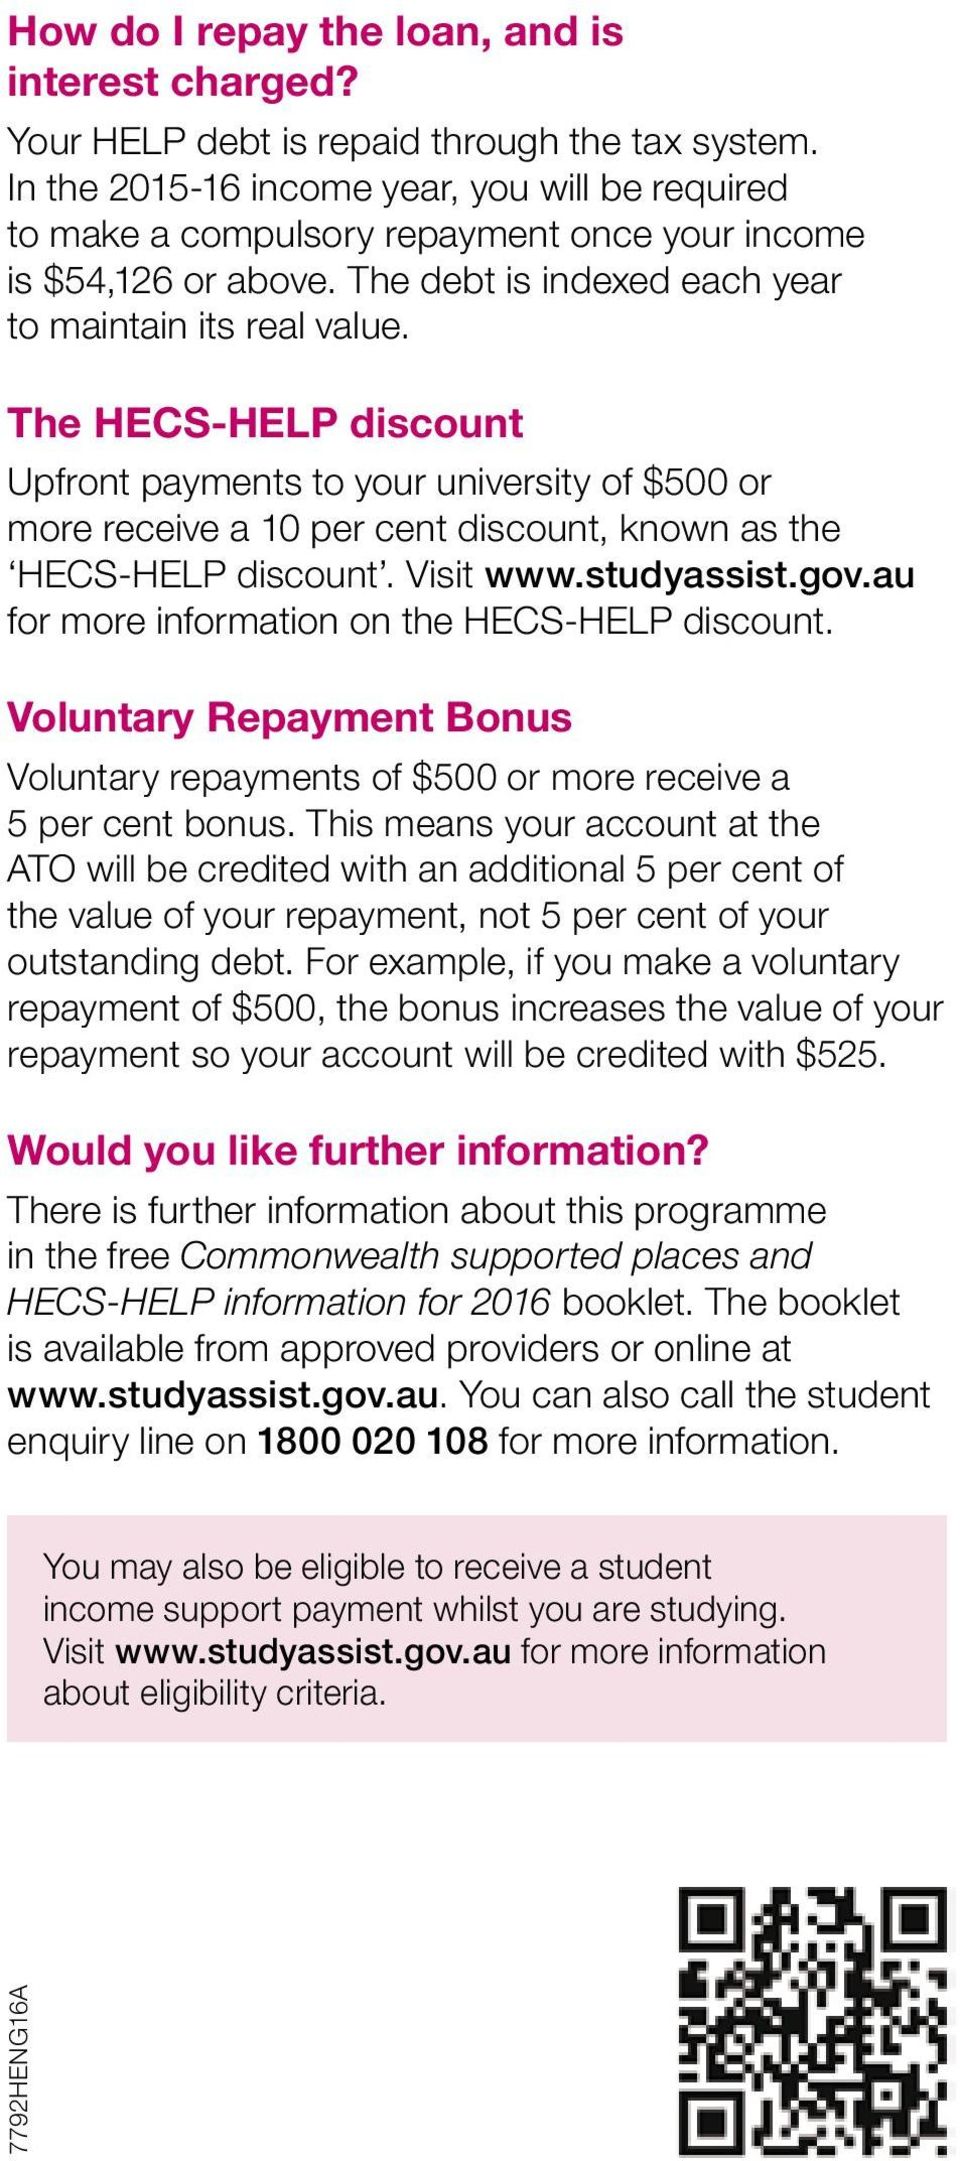 The HECS-HELP discount Upfront payments to your university of $500 or more receive a 10 per cent discount, known as the HECS-HELP discount. Visit www.studyassist.gov.